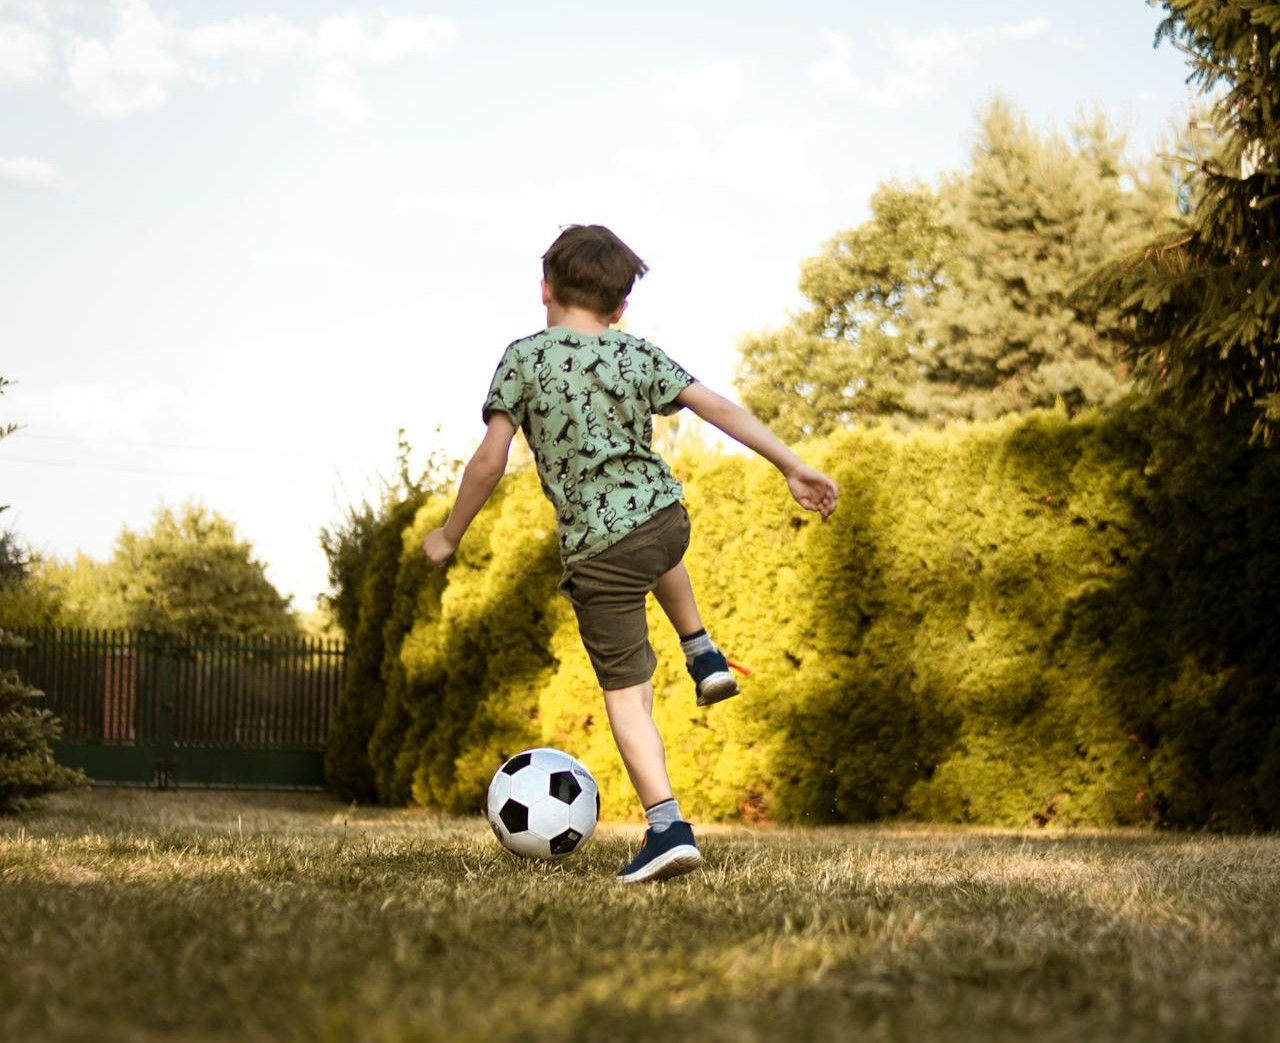 Active Children 'Feel Happier' But New Survey Shows Downward Trend